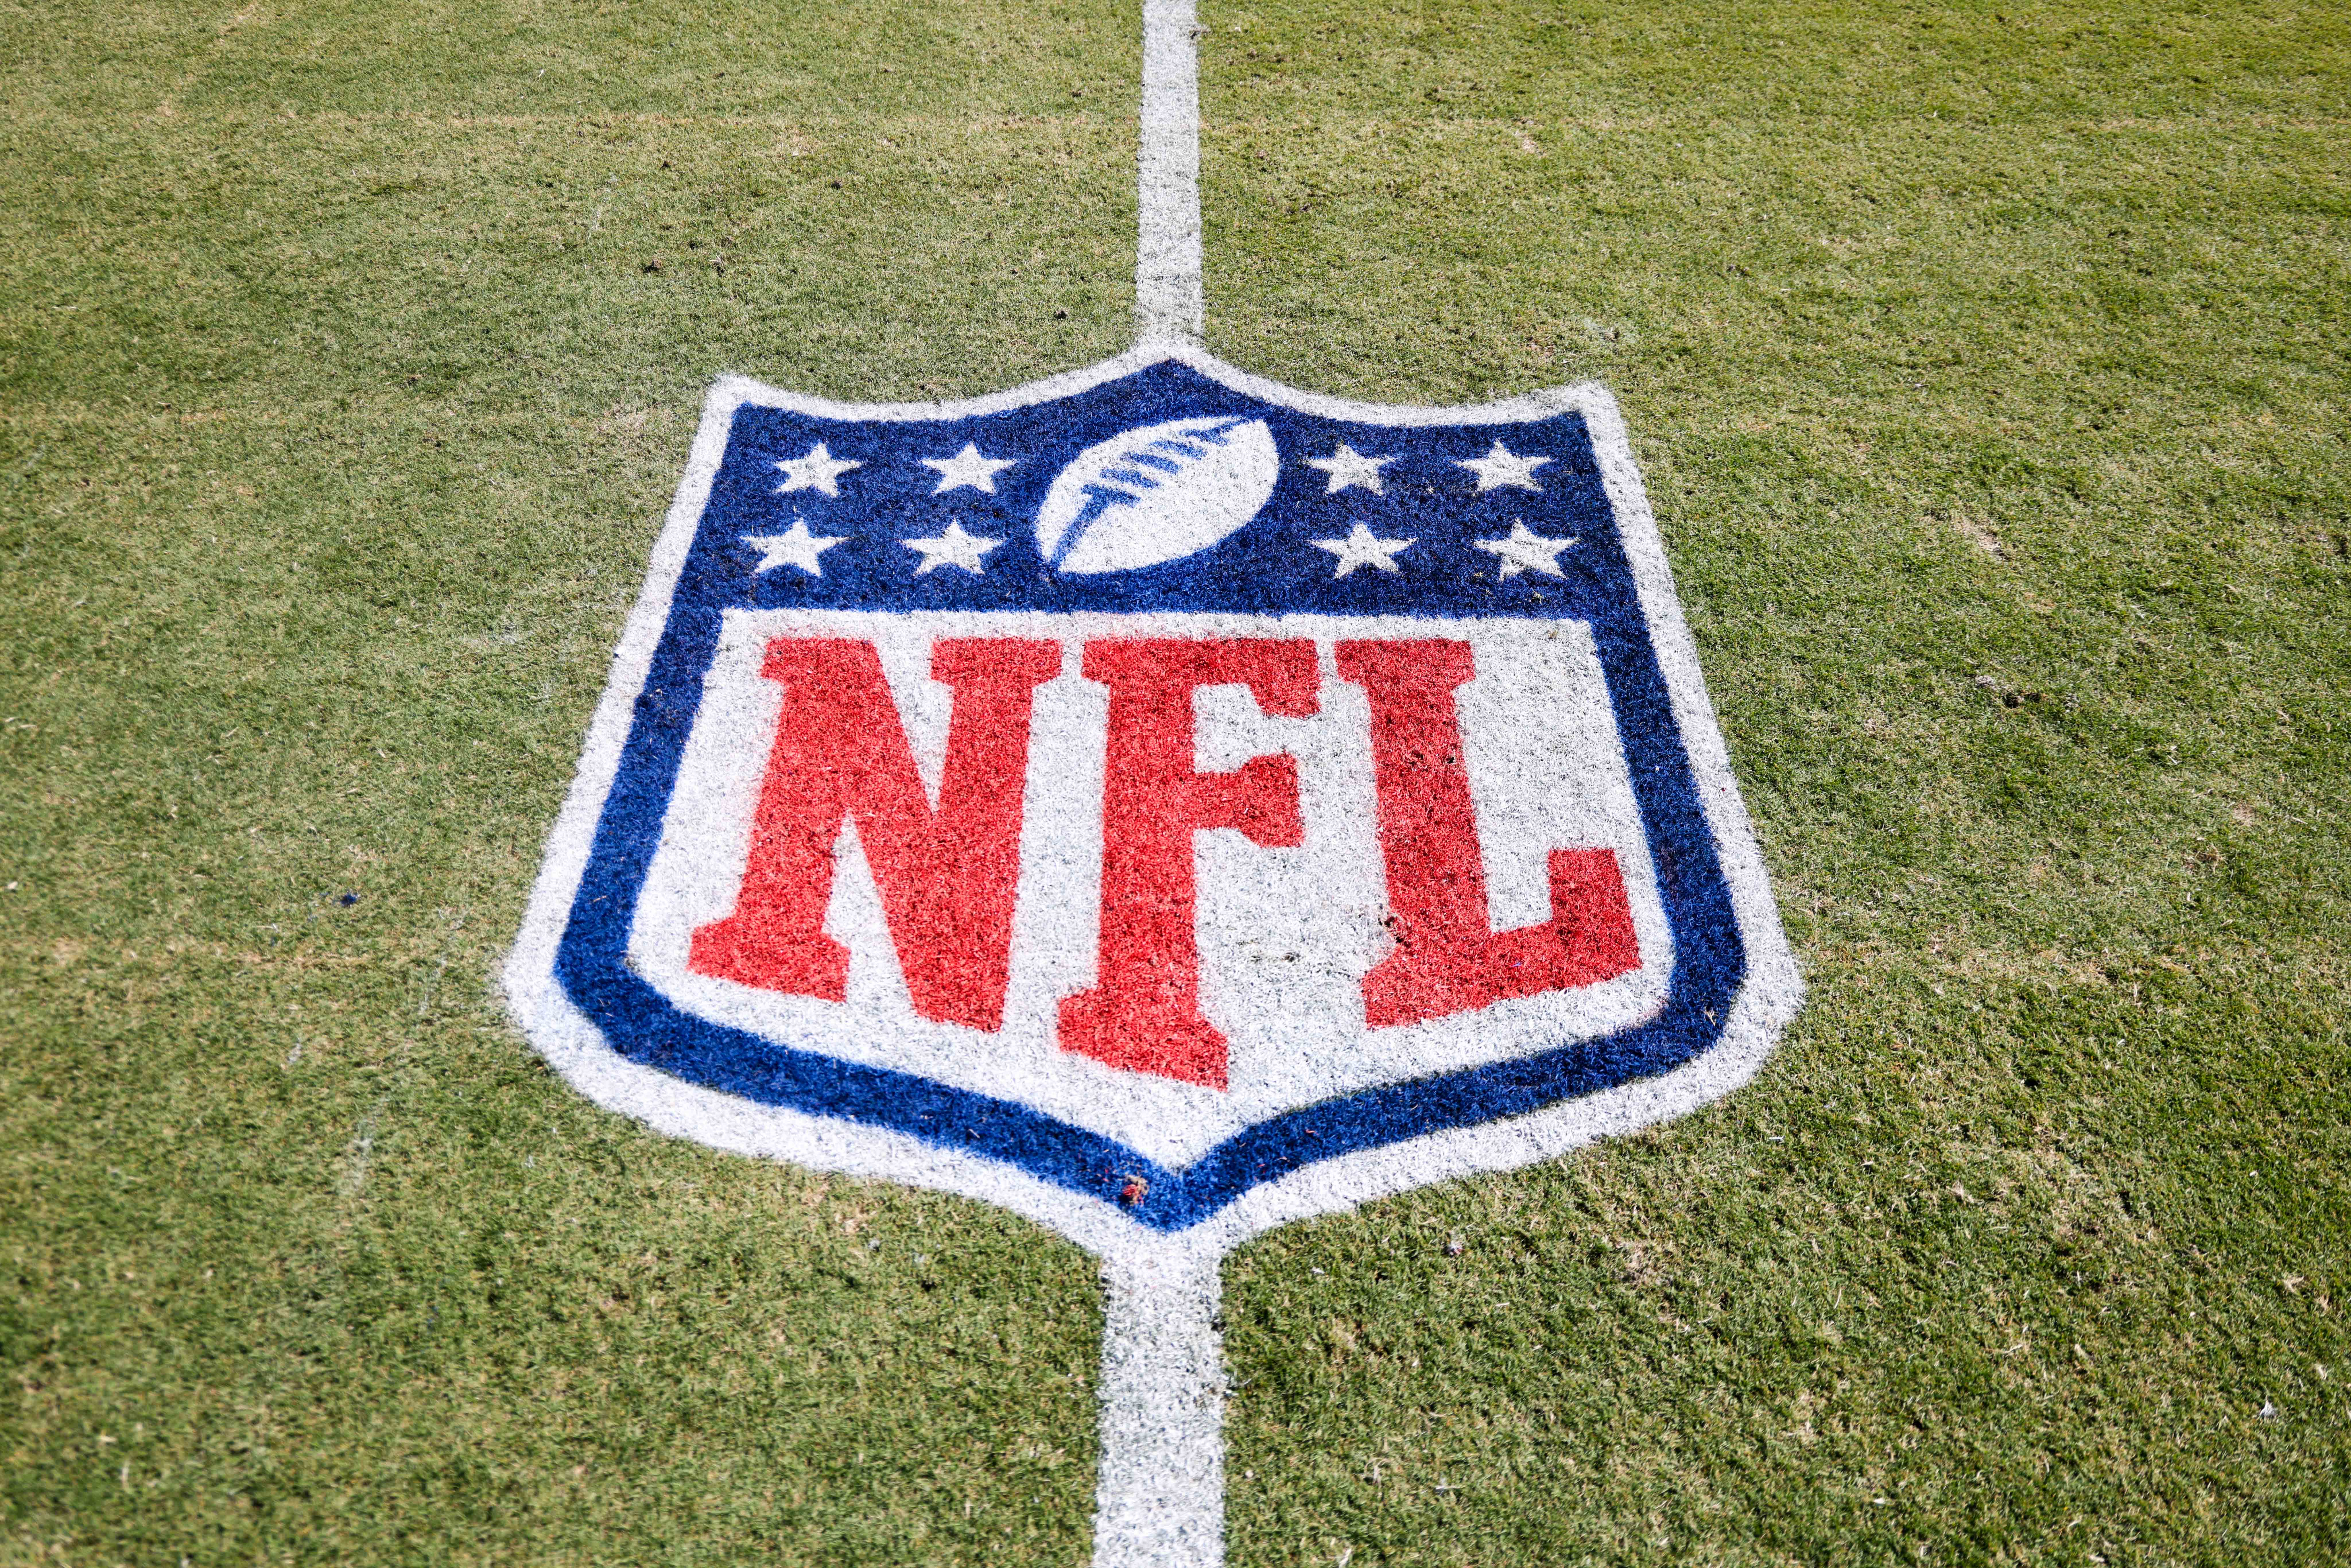 Important NFL dates for March 2023